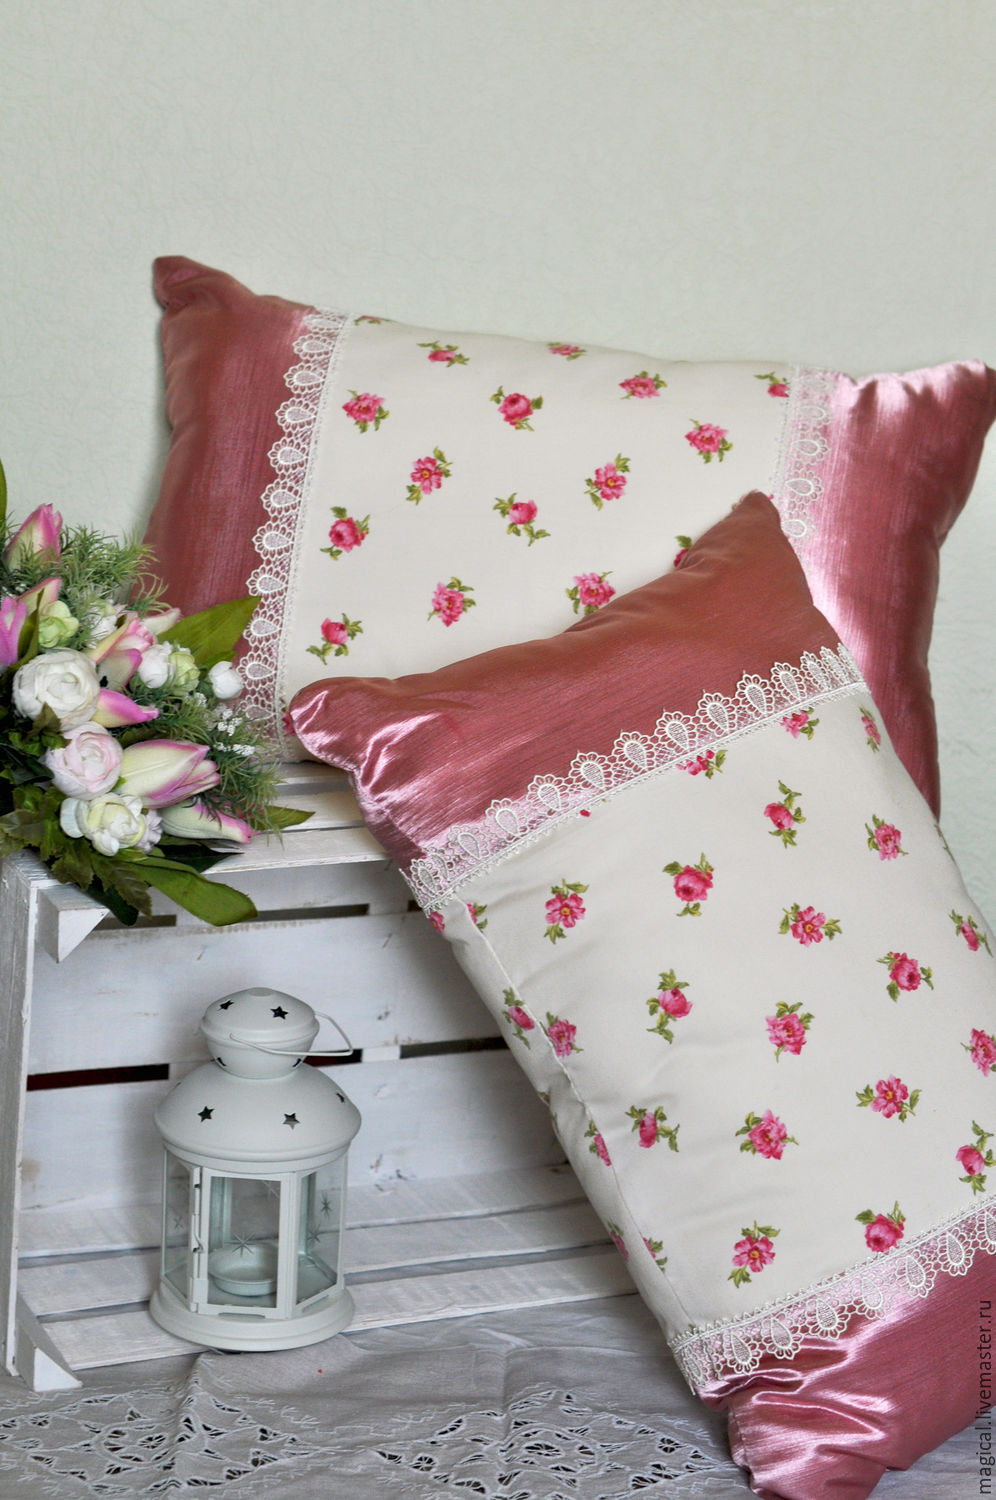 Stylish Mixed Patterns and Complementary Pillows